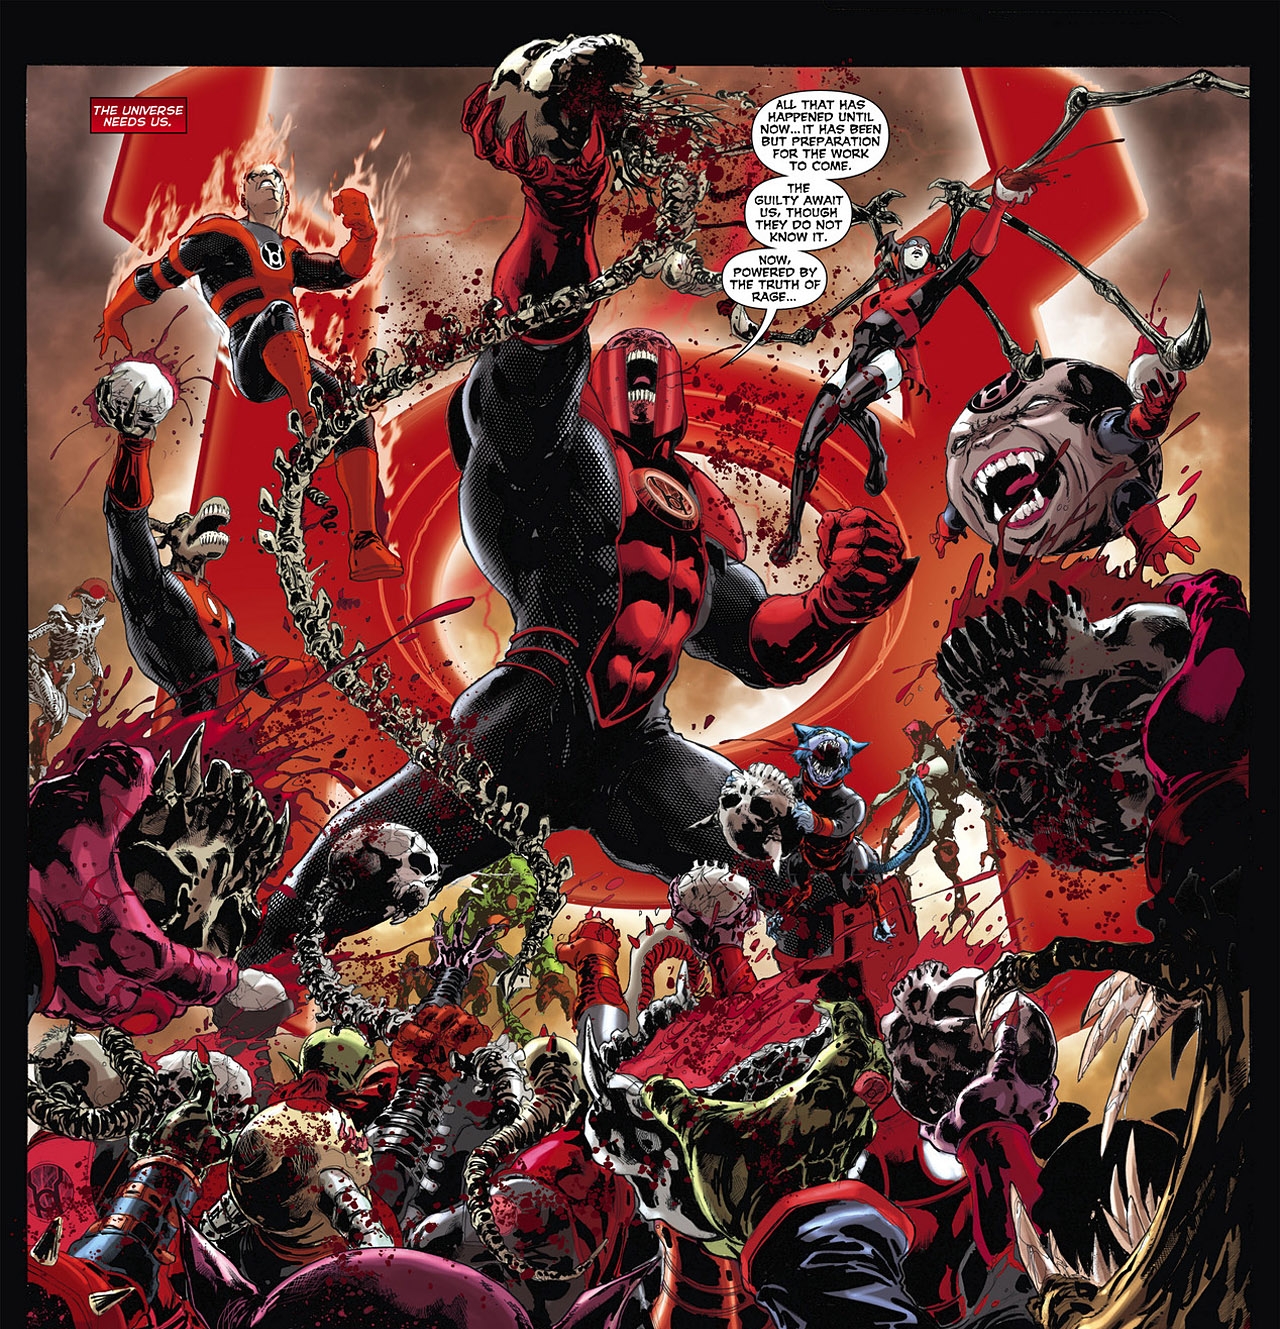 Amazing Red Lantern Corps Pictures & Backgrounds